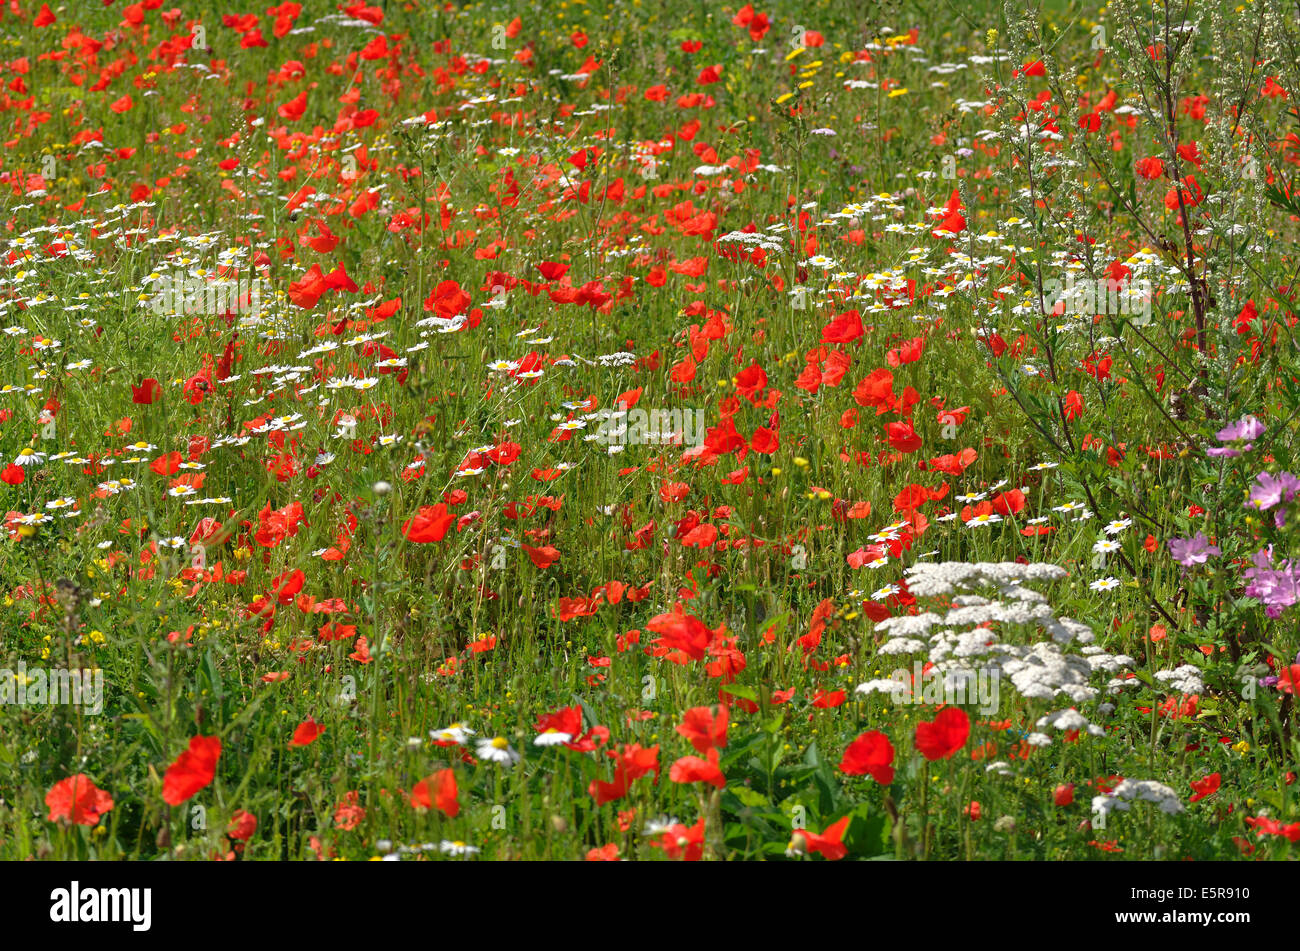 Meadow flowers, Poppies, Chamomile, Daisies. Stock Photo